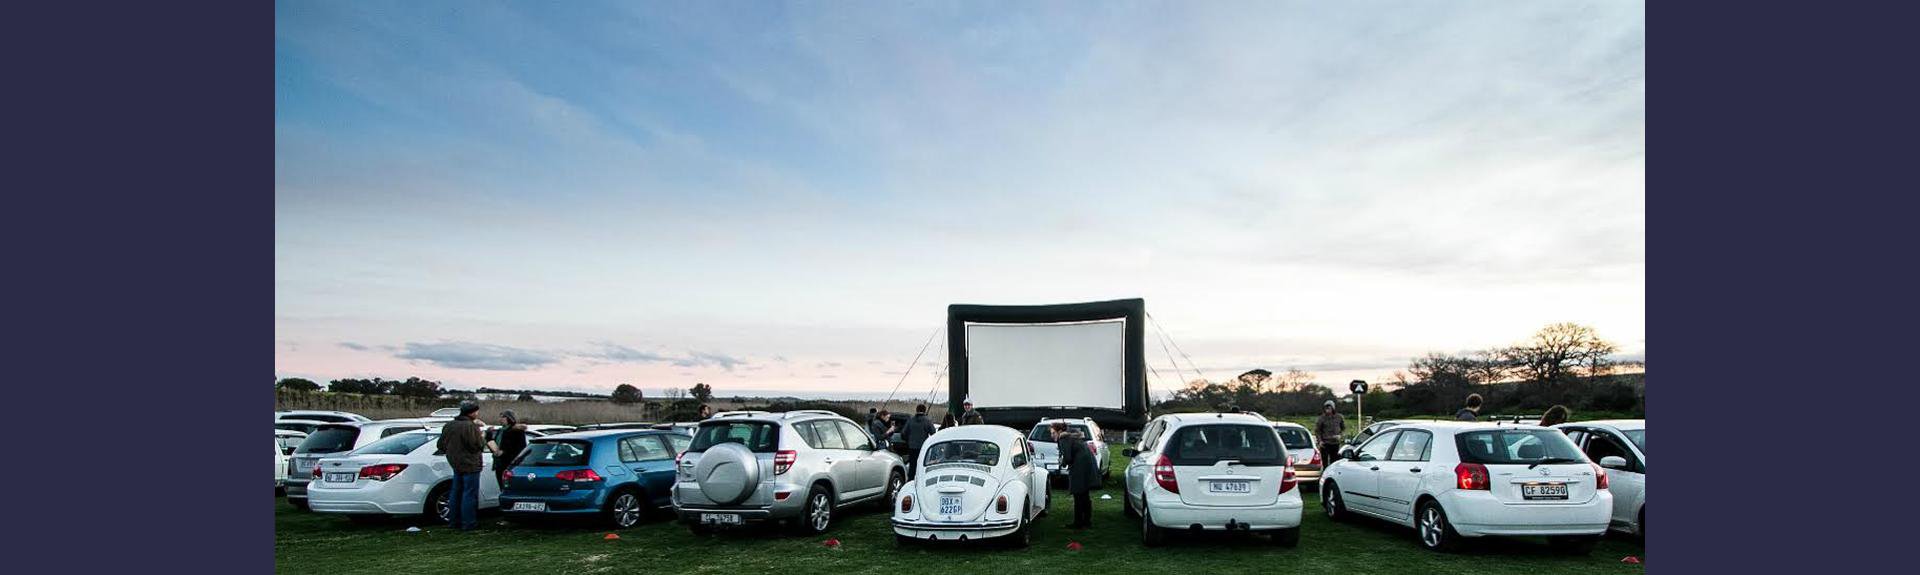 Drive-in at Spier: Grand Budapest Hotel